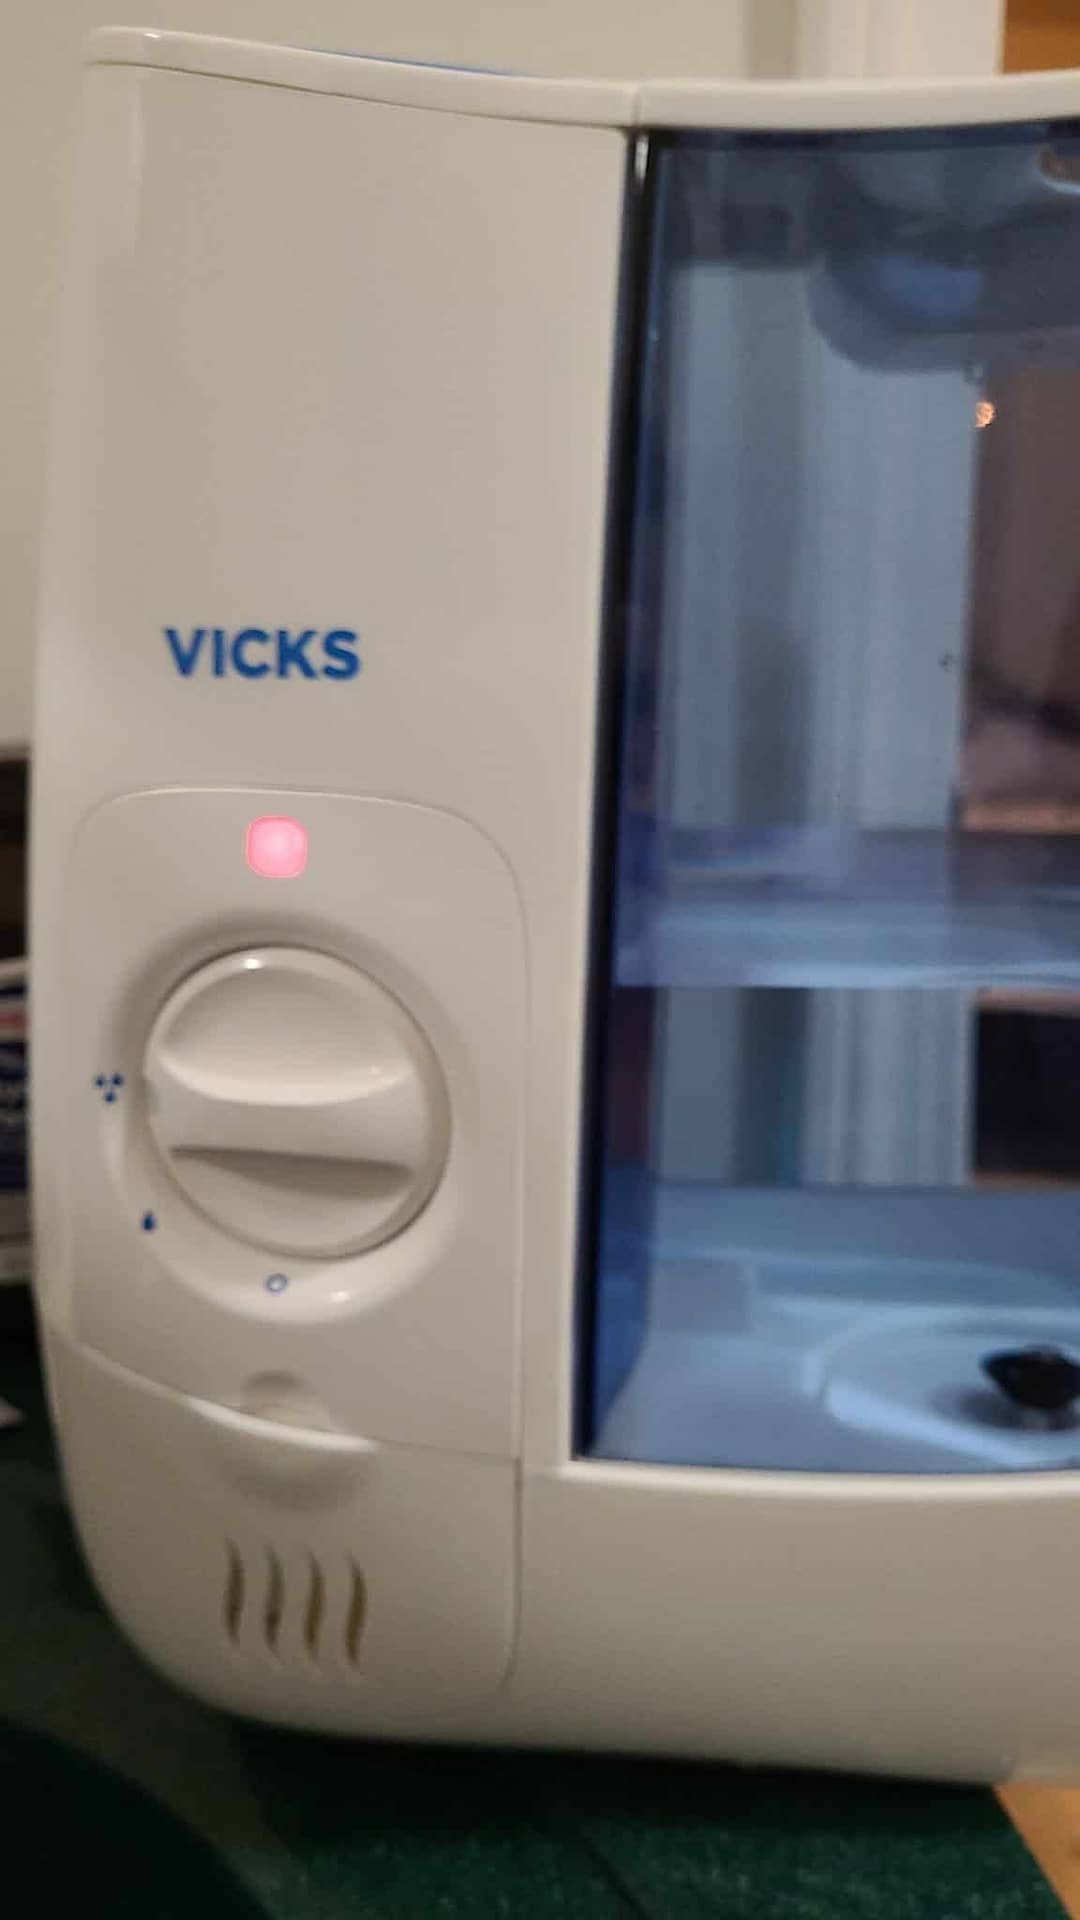 Vicks Humidifier Red Light: 5 Easy Ways To Fix It Now